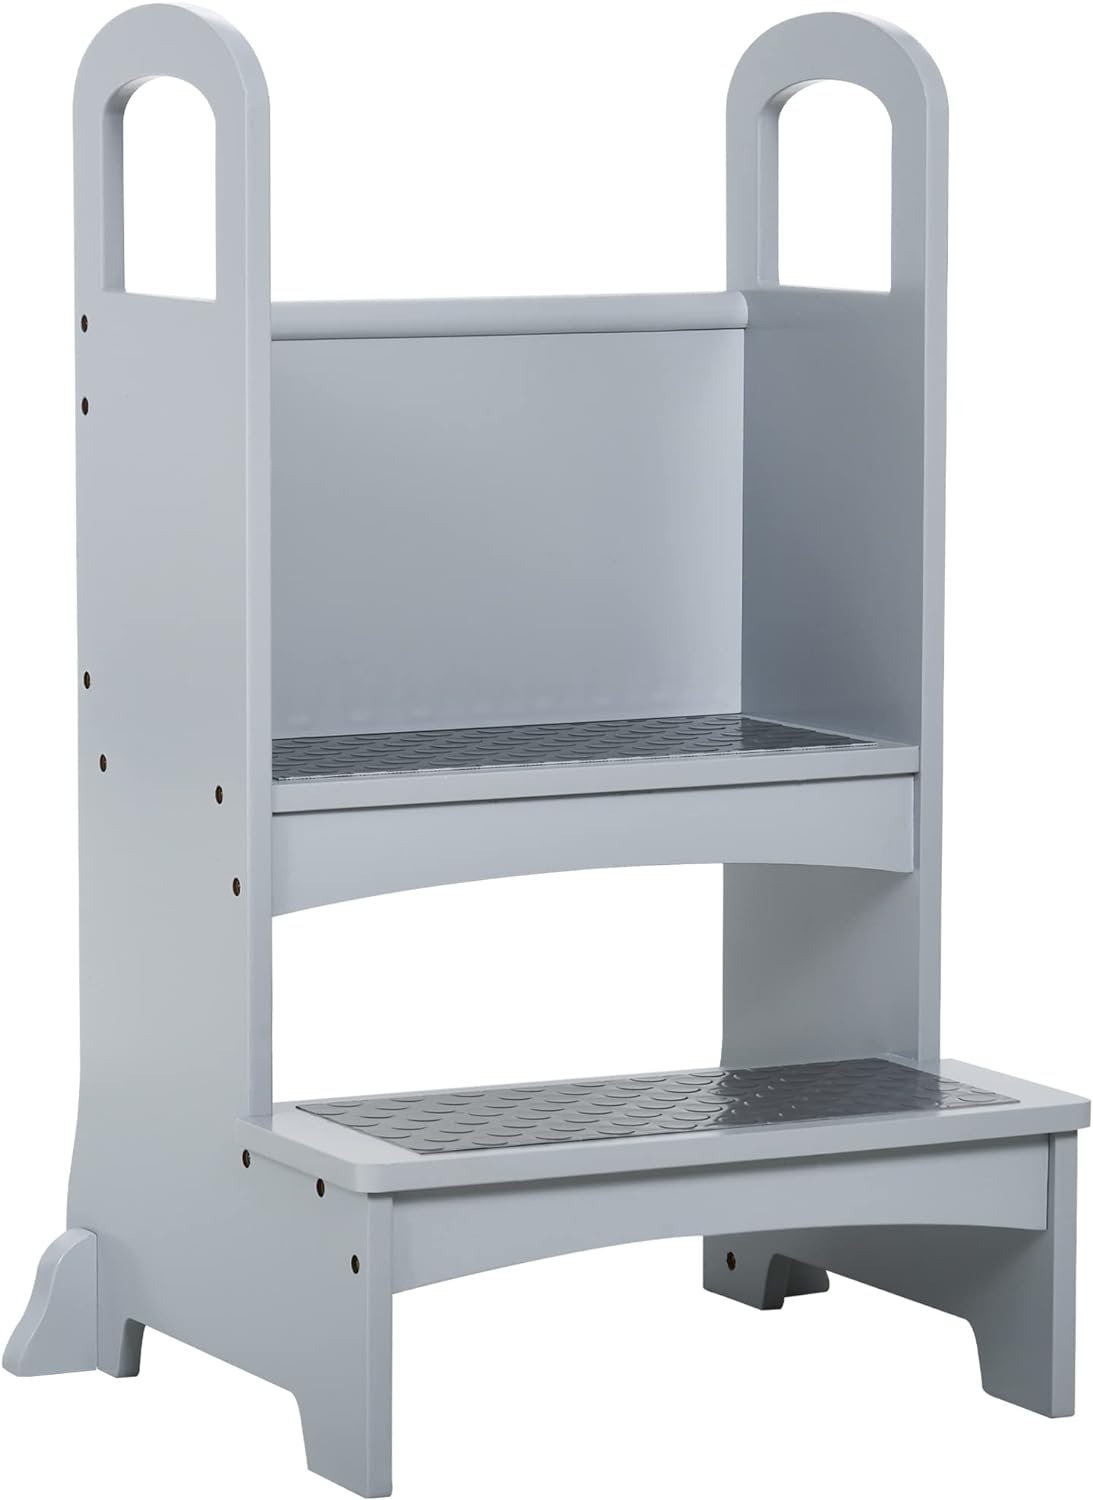 Kitchen Tower for Kids - Grey Wooden Step Stool with Non-Slip Safety Panels & Handles, Perfect Learning Tower for Toddlers 3-8 Yrs - TovaHaus